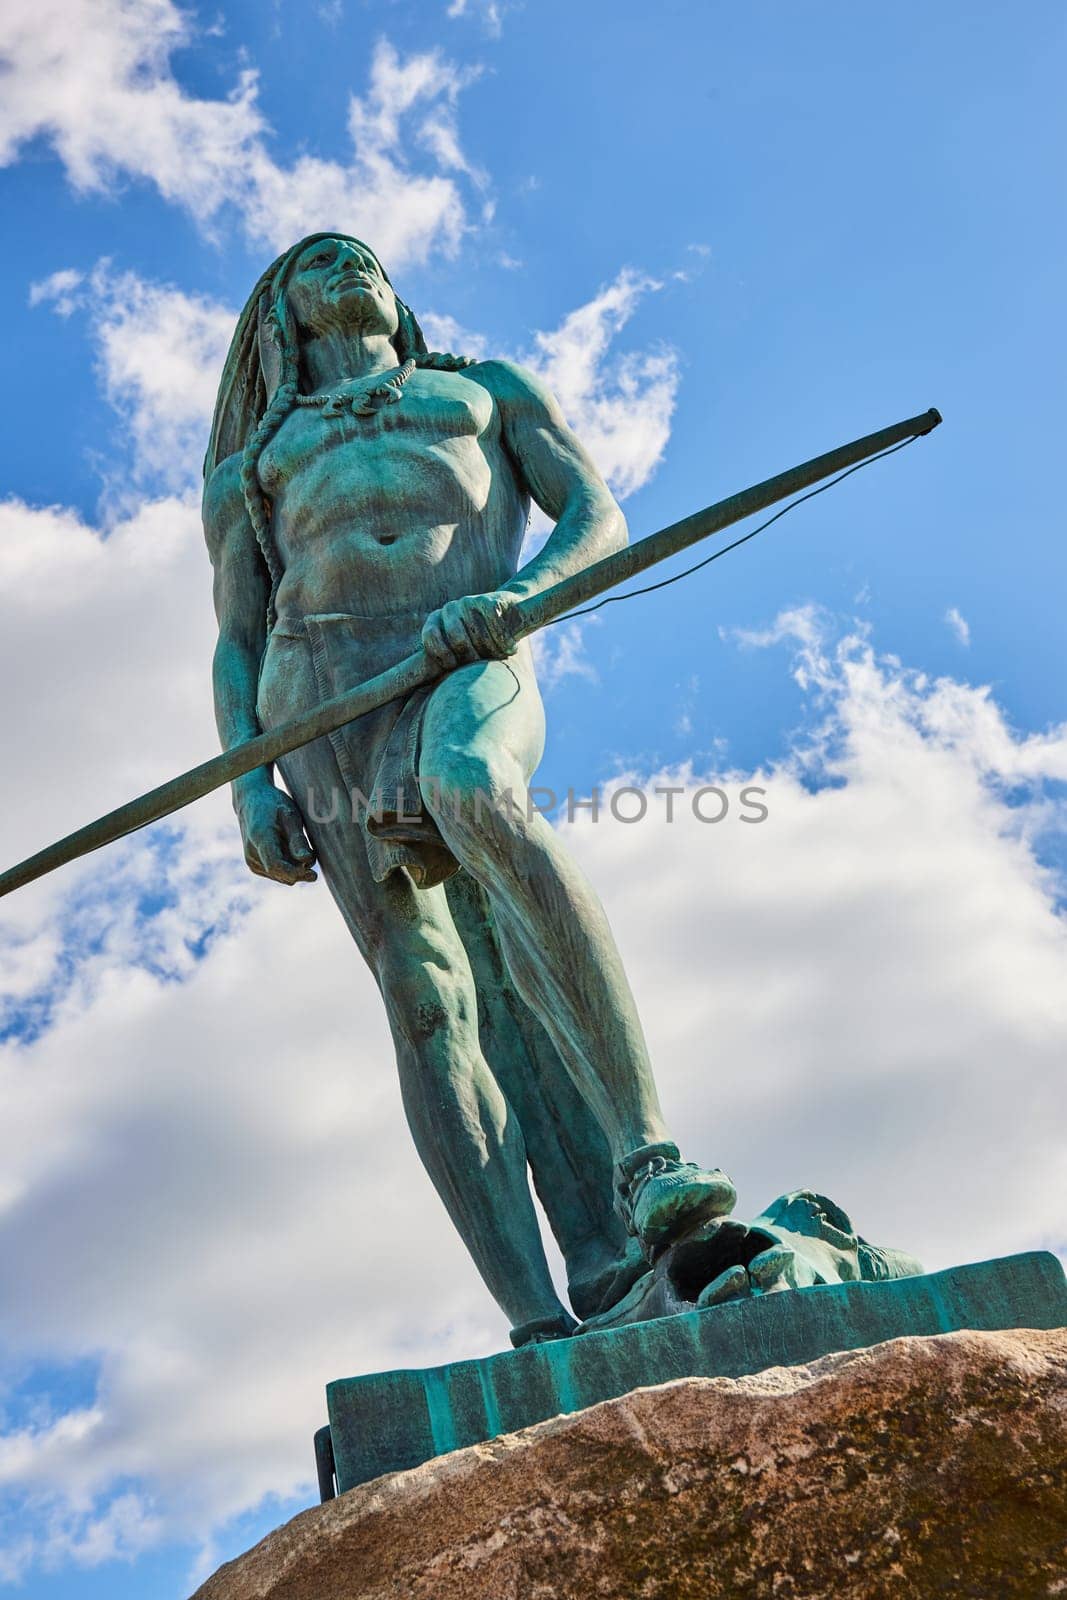 Majestic Bronze Statue in Downtown Muncie, Indiana, Representing Strength and Vigilance against a Vivid Blue Sky